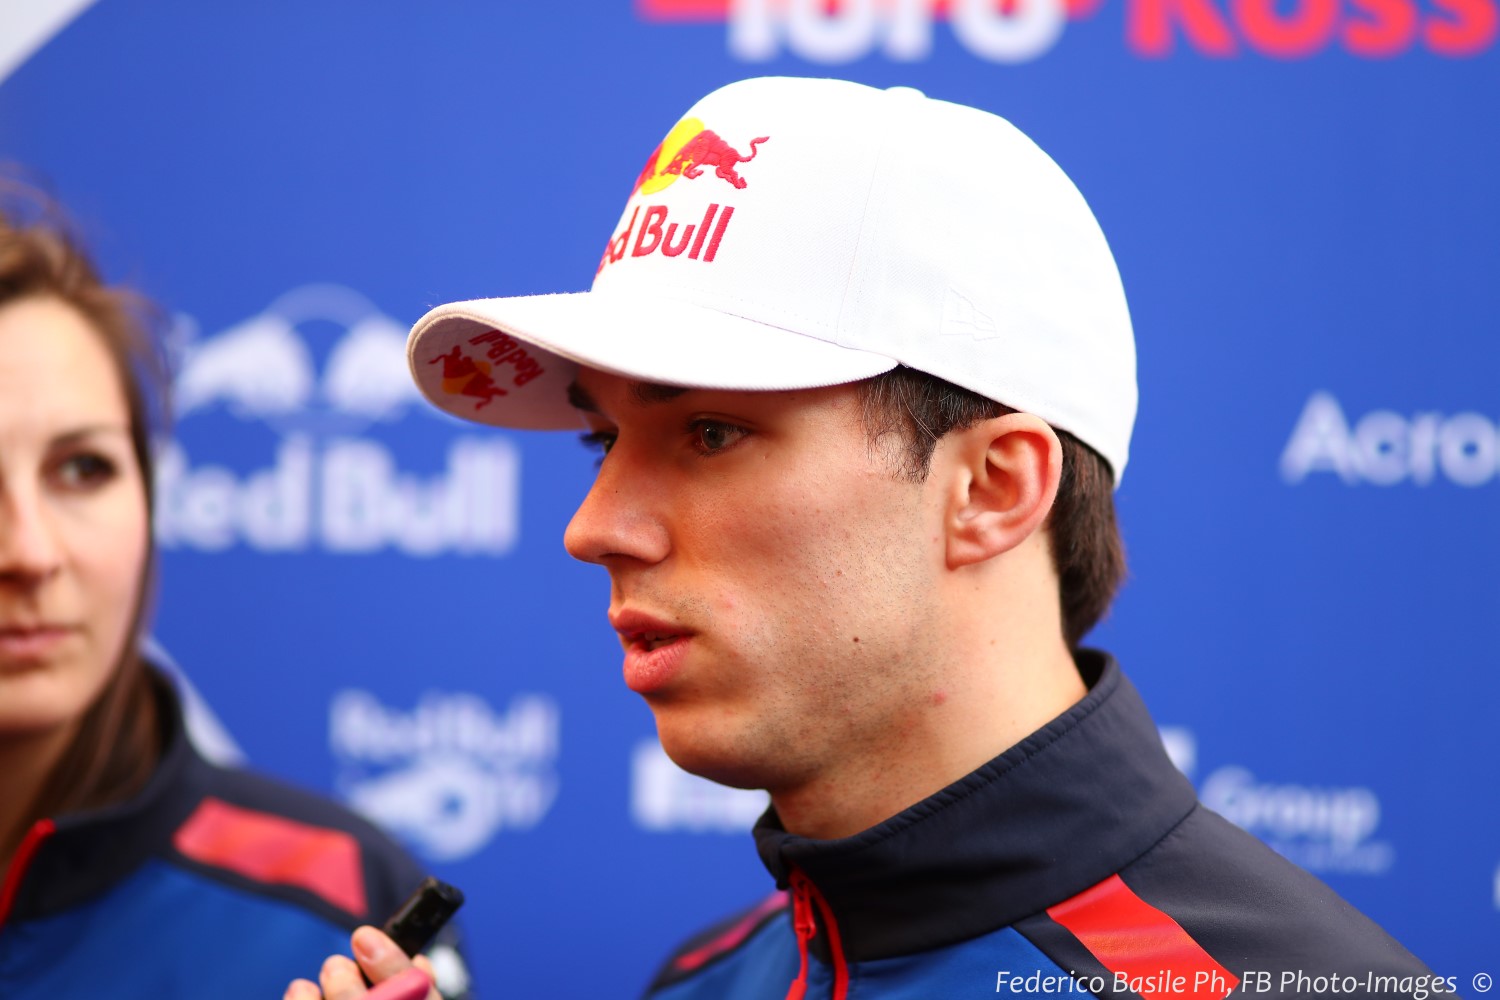 Pierre Gasly, not afraid for his life, but he better be prepared to have his career destroyed